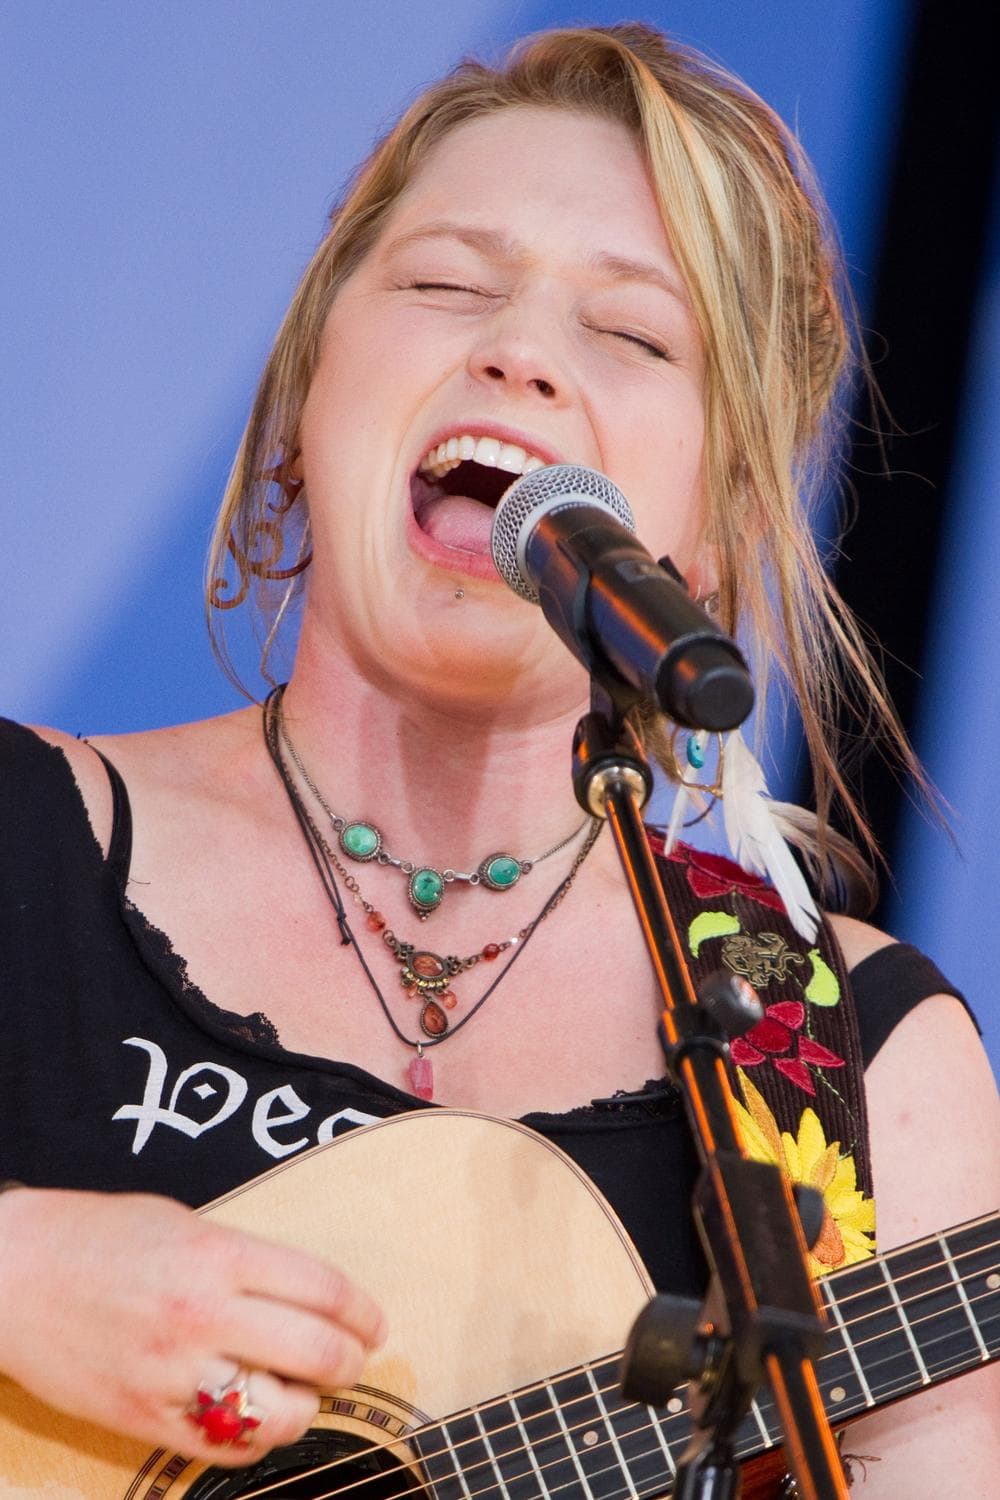 American Idol runner-up Crystal Bowersox performs in Central Park, on ABC's &quot;Good Morning America&quot; show. (AP)